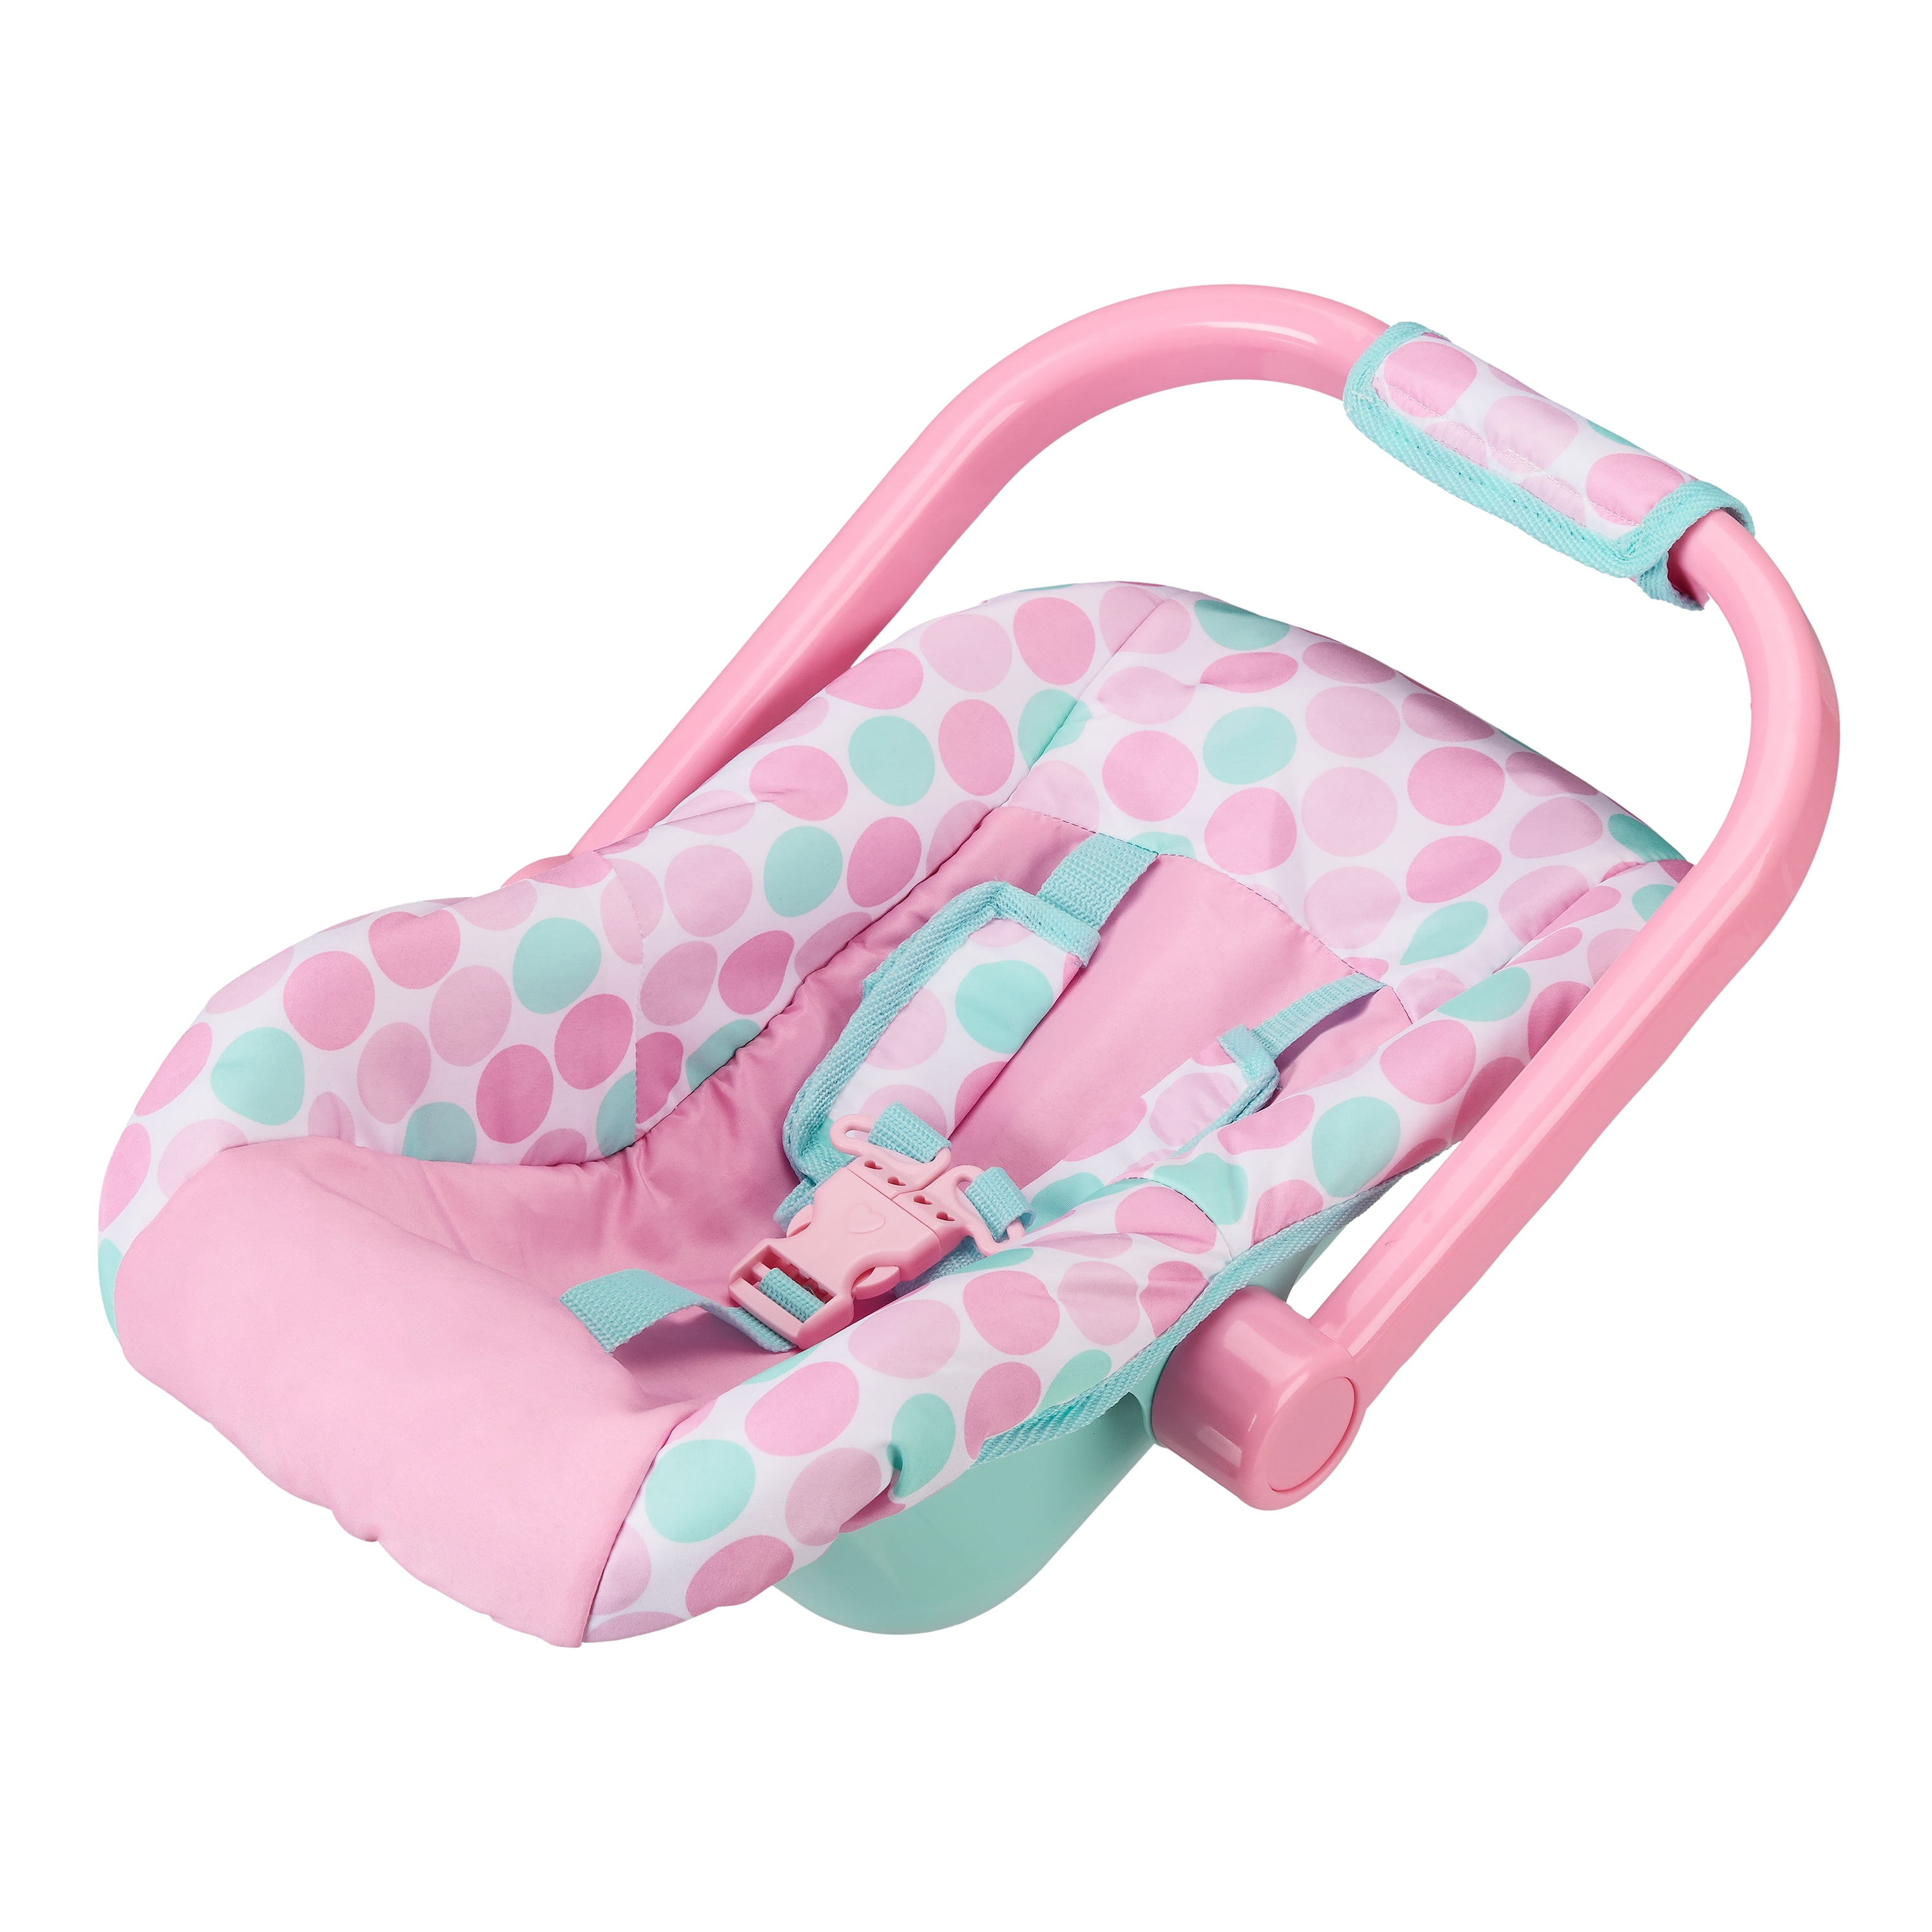 Mamas & Papas My First Toy Dolls Pram Is The Perfect Height For Your Little One 